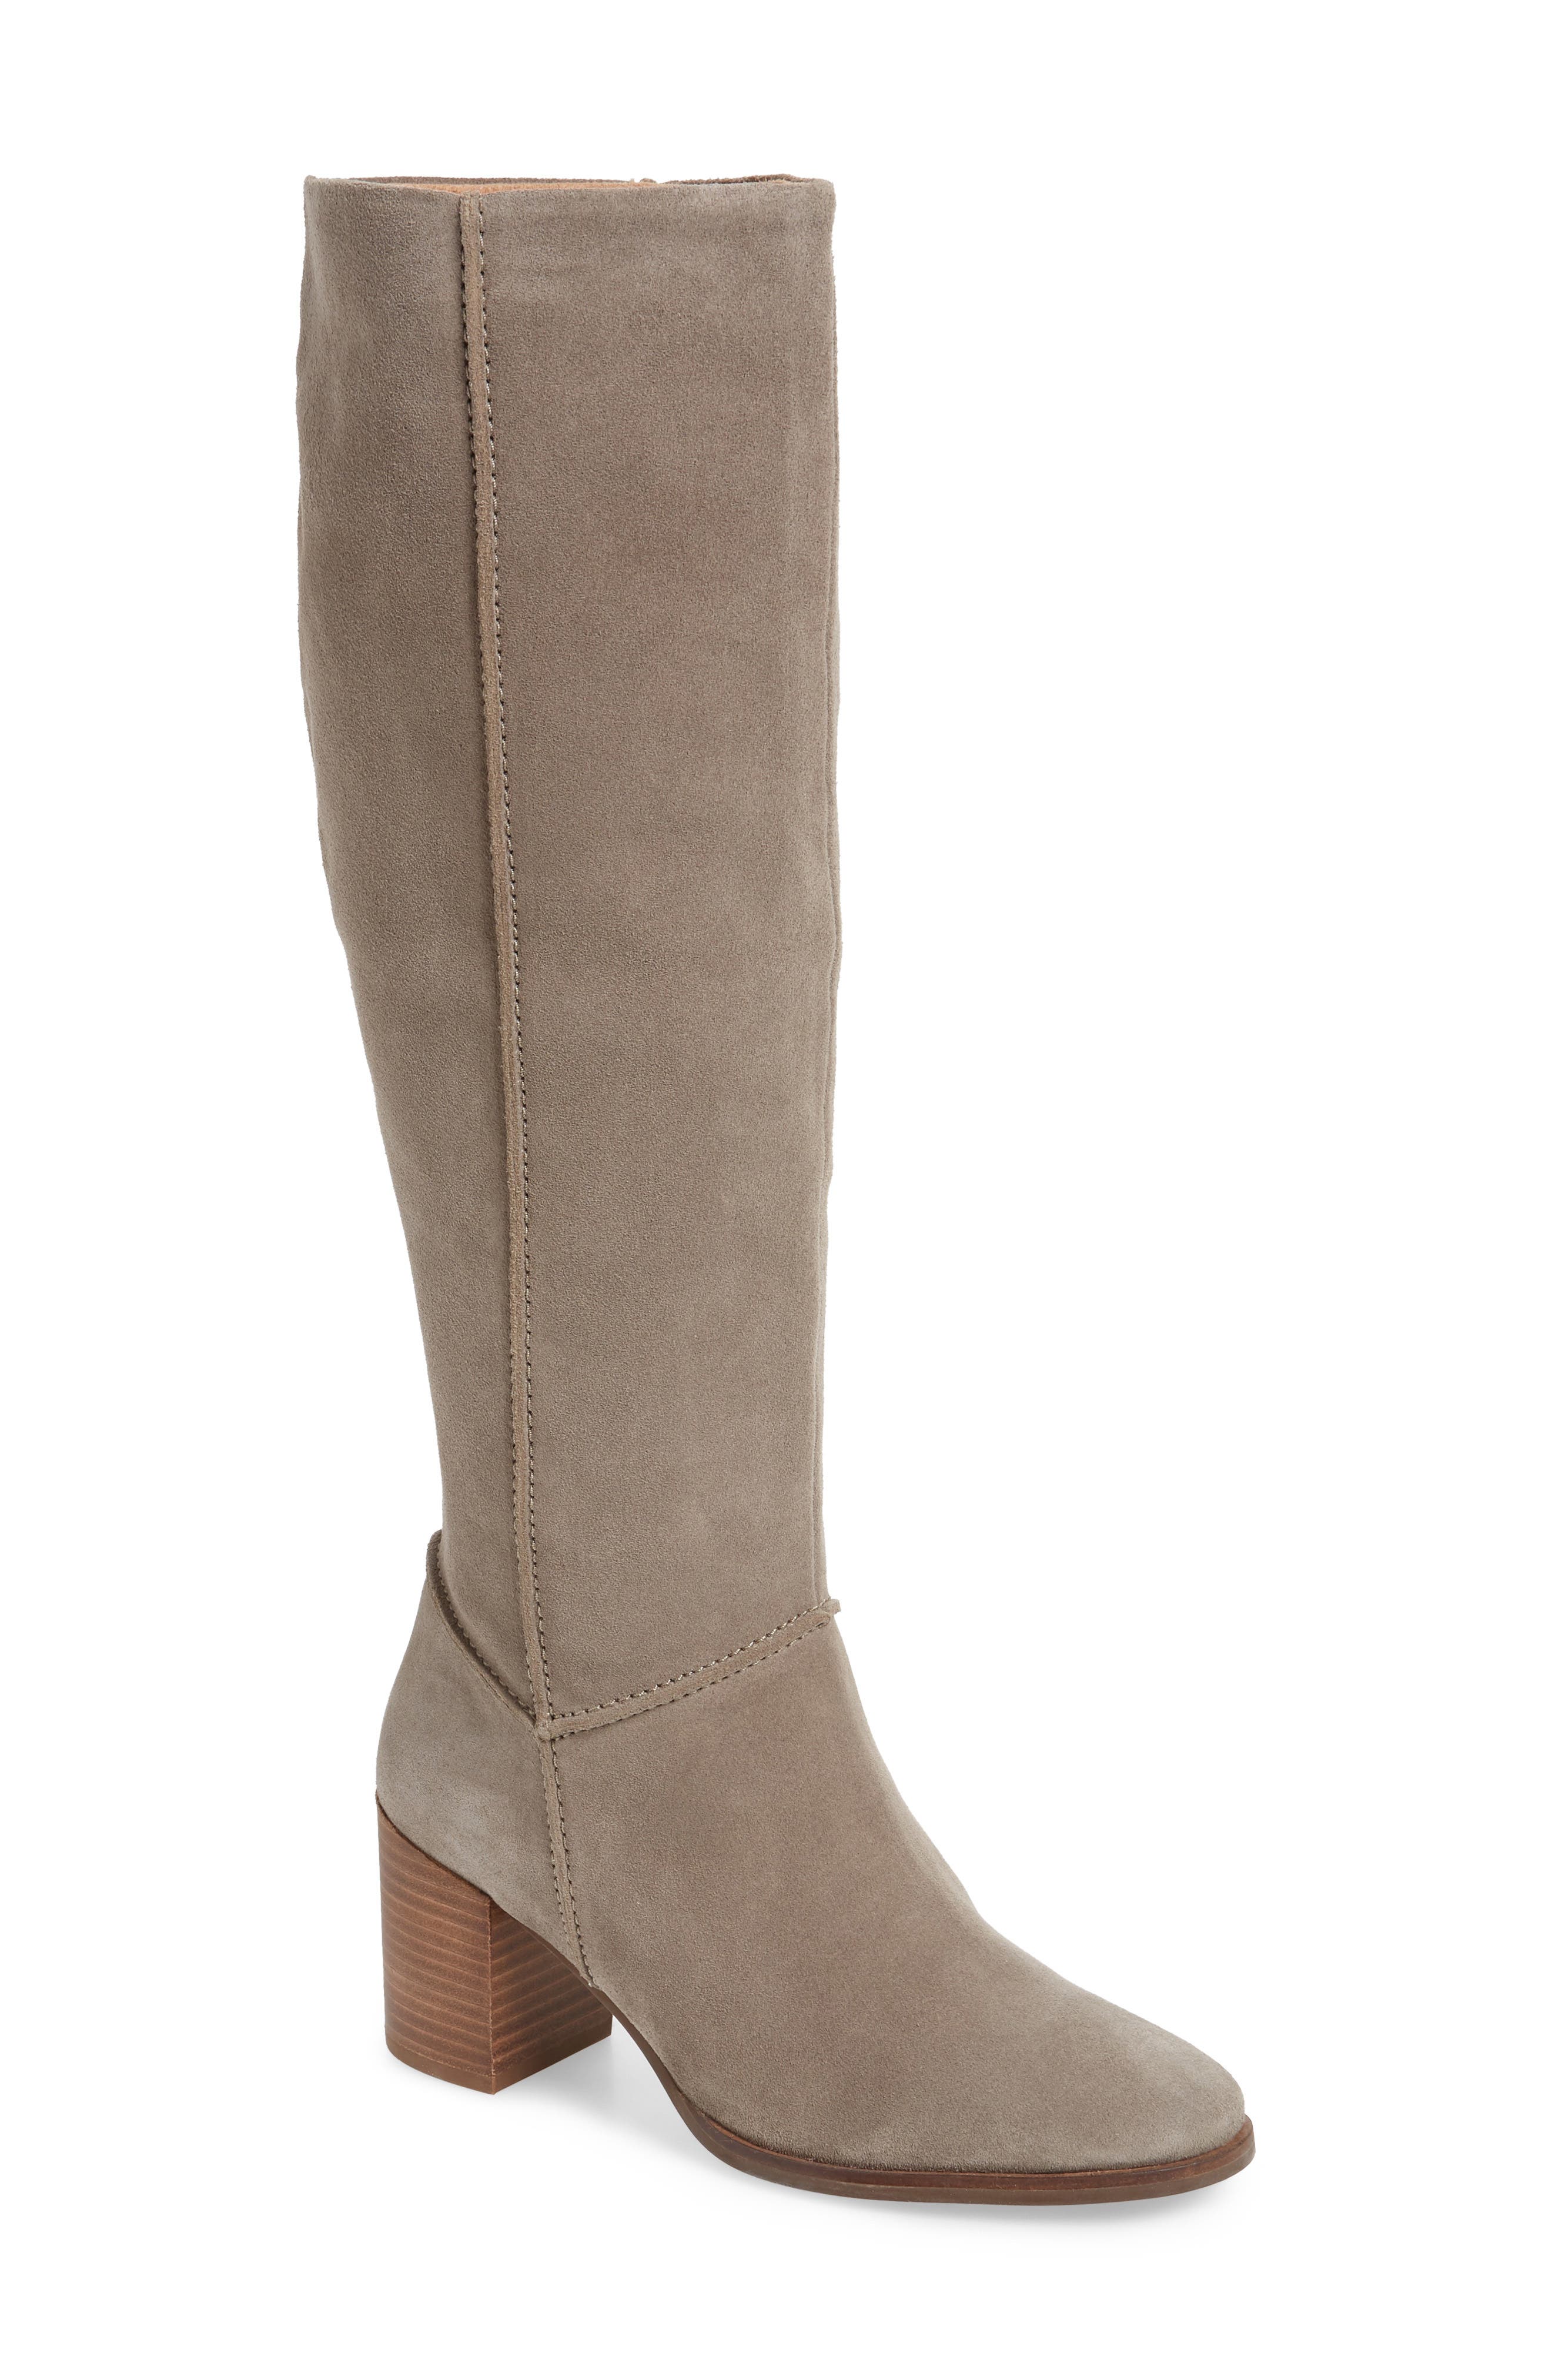 taupe suede boots knee high